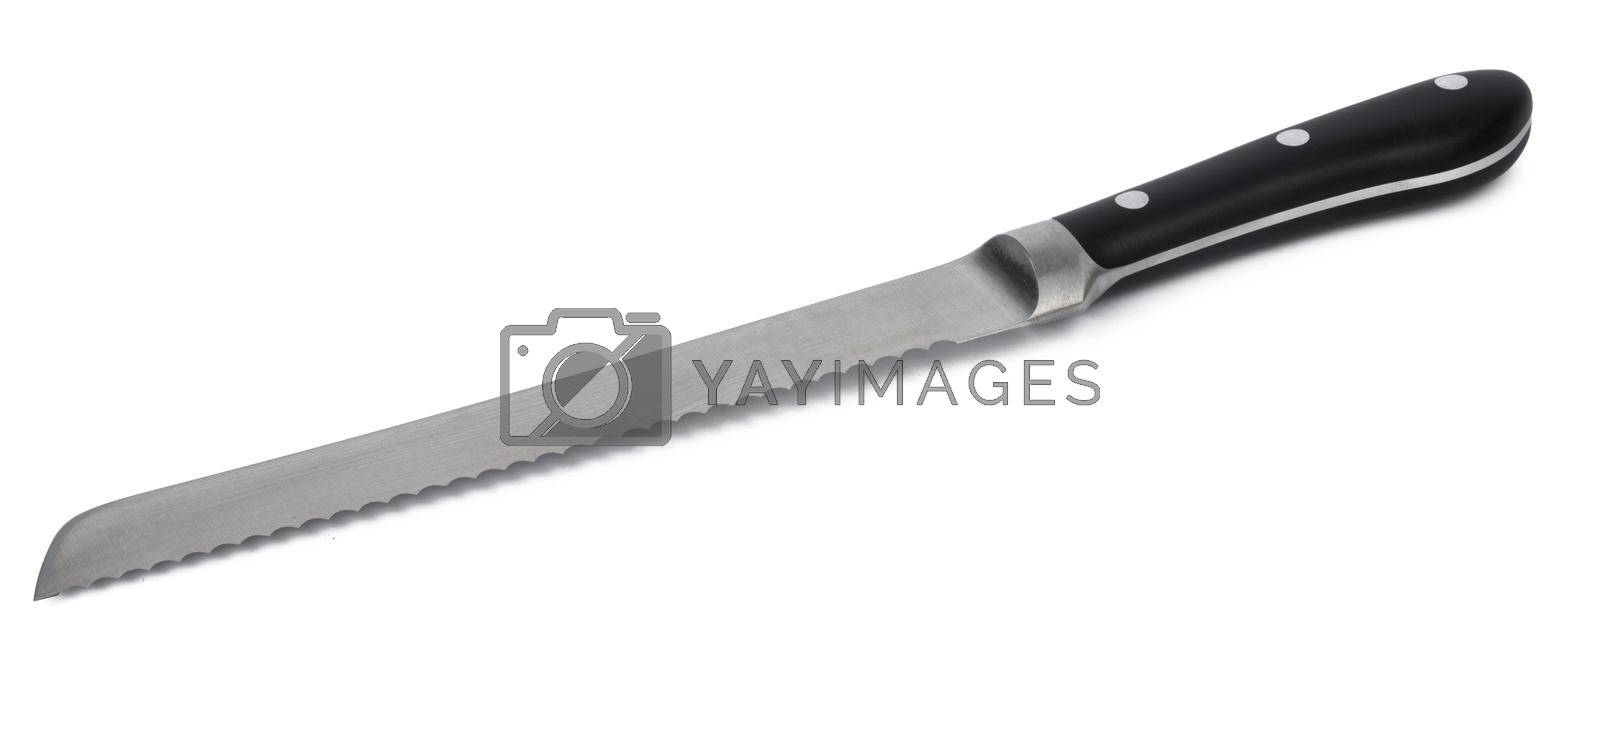 Royalty free image of New sharp metal knife on white background by Fabrikasimf